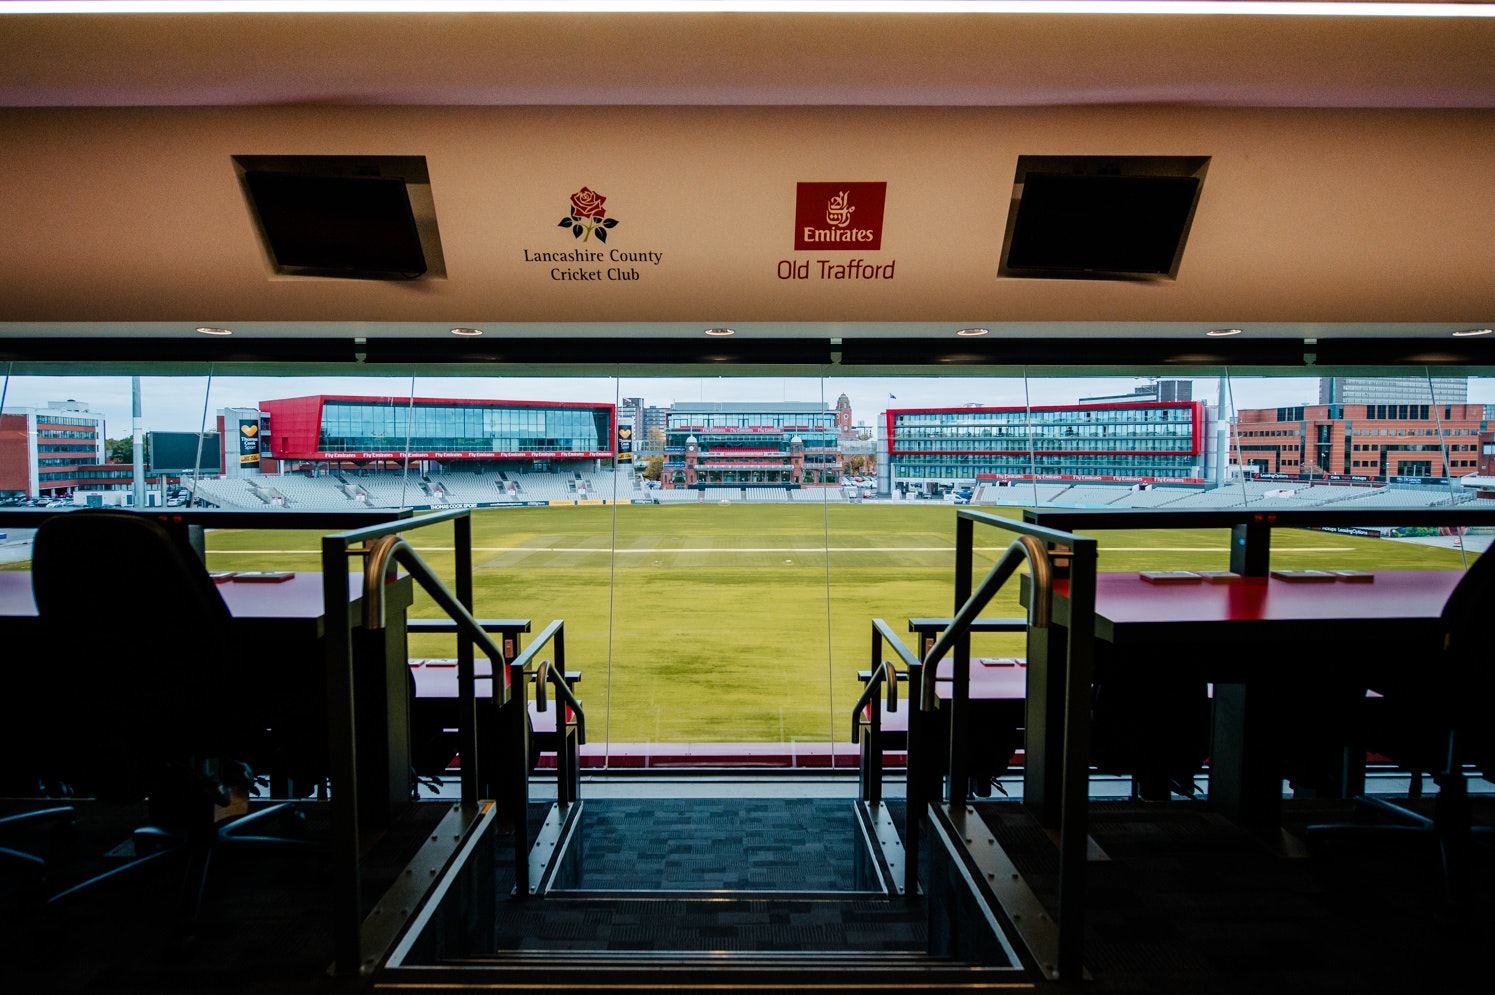 Exhibition Venues in Manchester - Emirates Old Trafford 